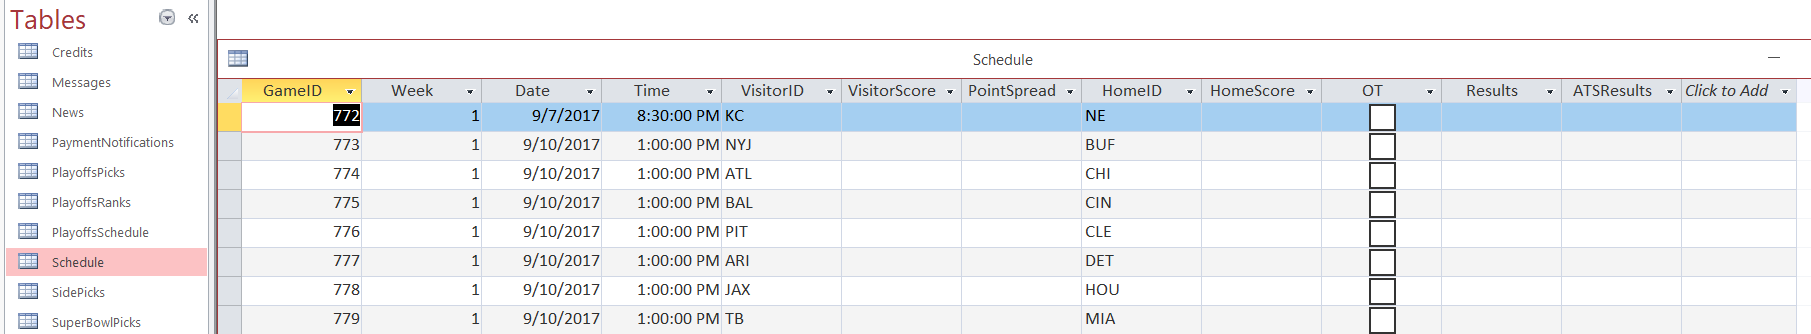 Schedule Table.PNG